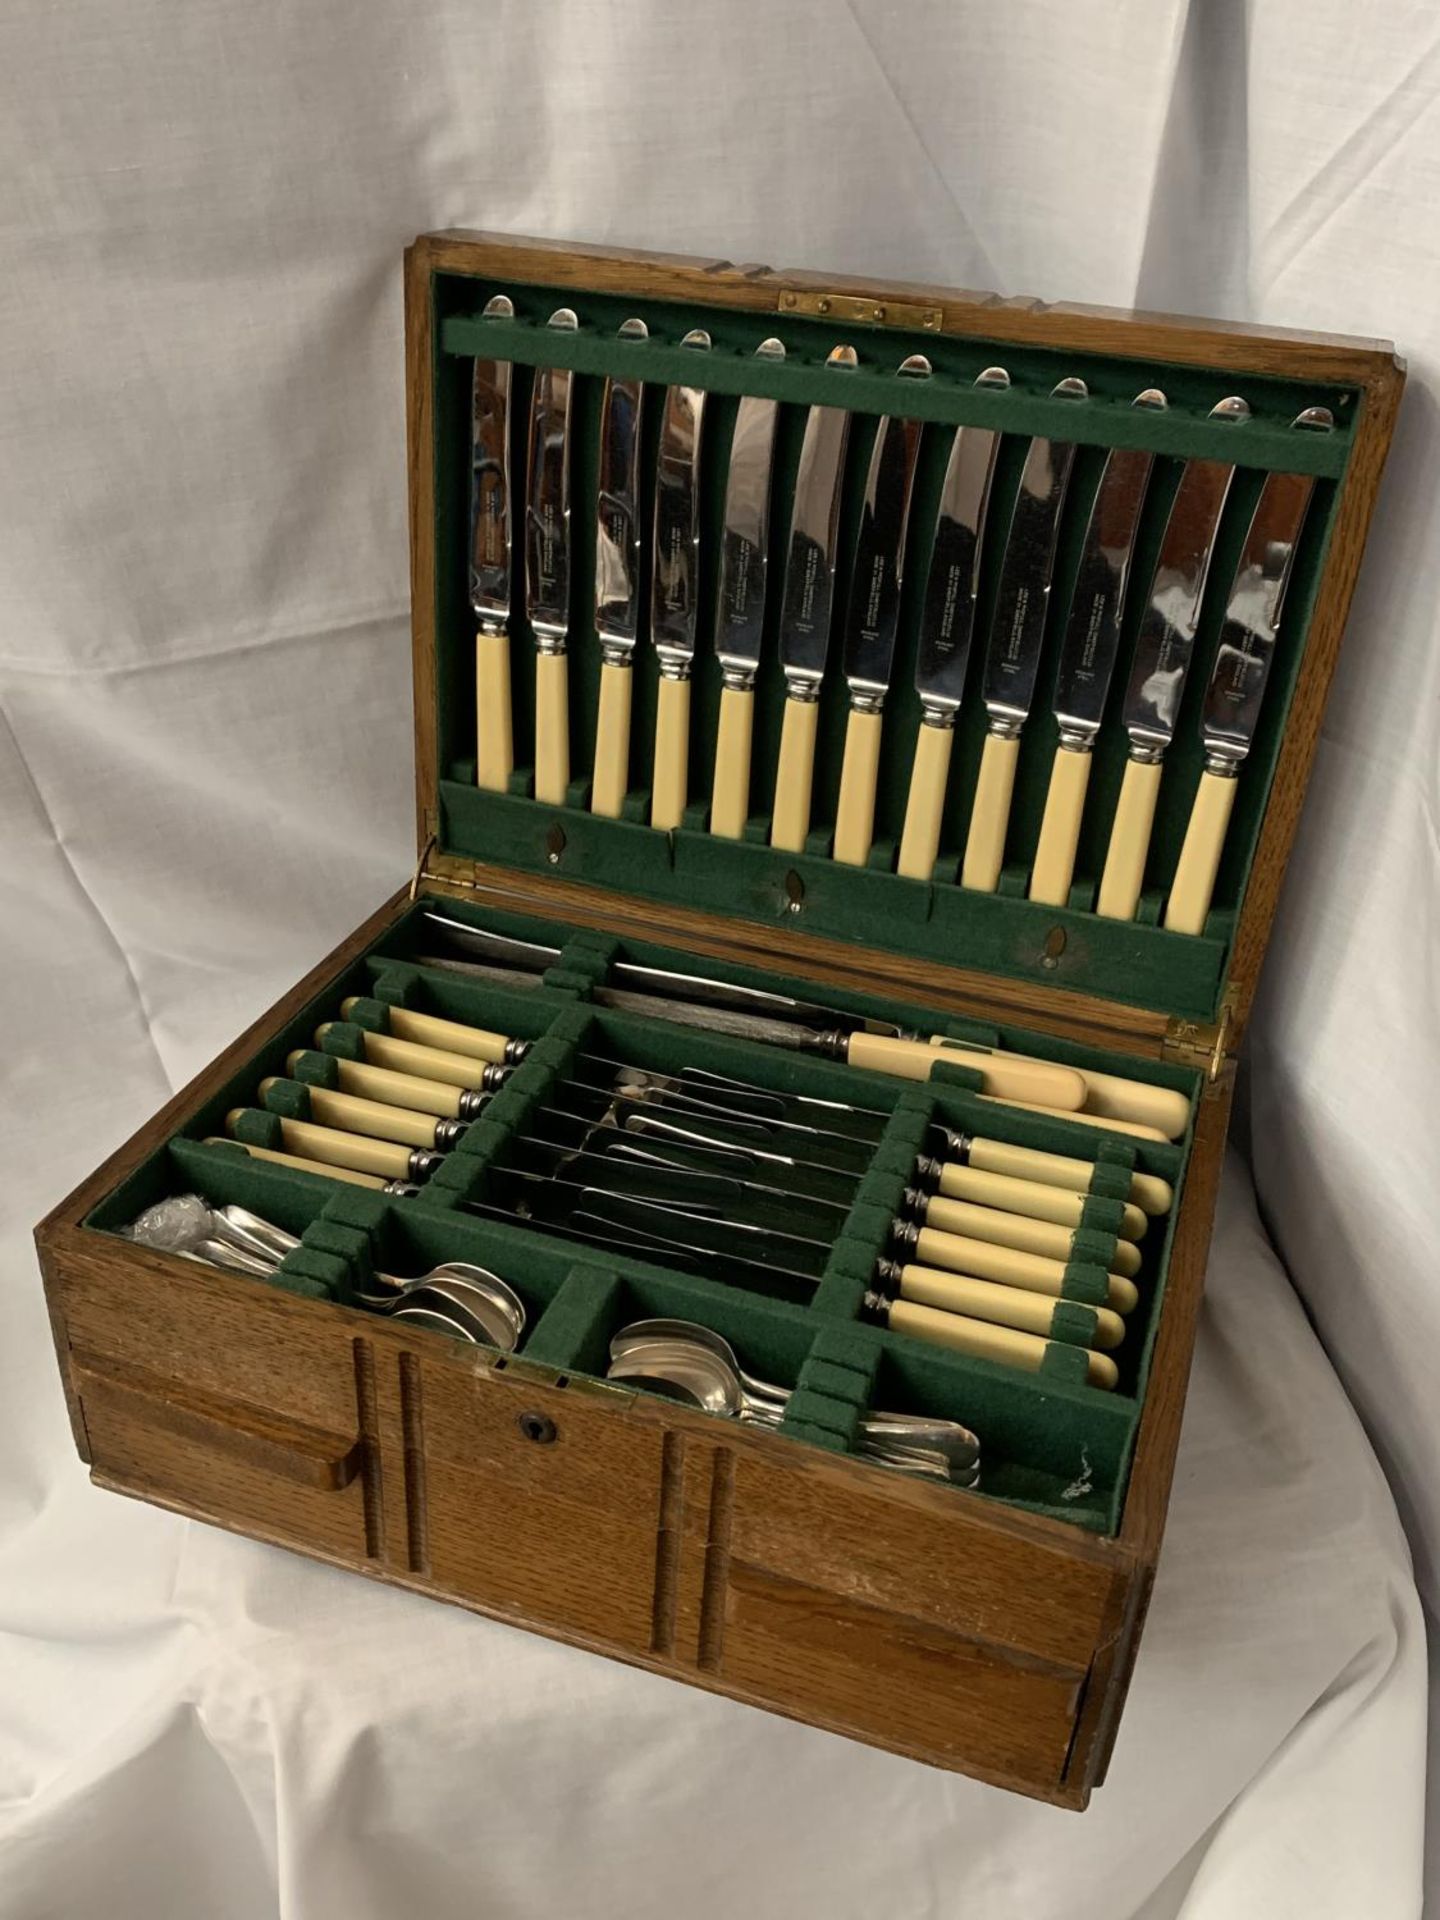 A LARGE OAK BOX WITH WOODEN CROSSBANDING DETAIL CONTAINING SILVER PLATE FLATWARE (TWELVE PLACE